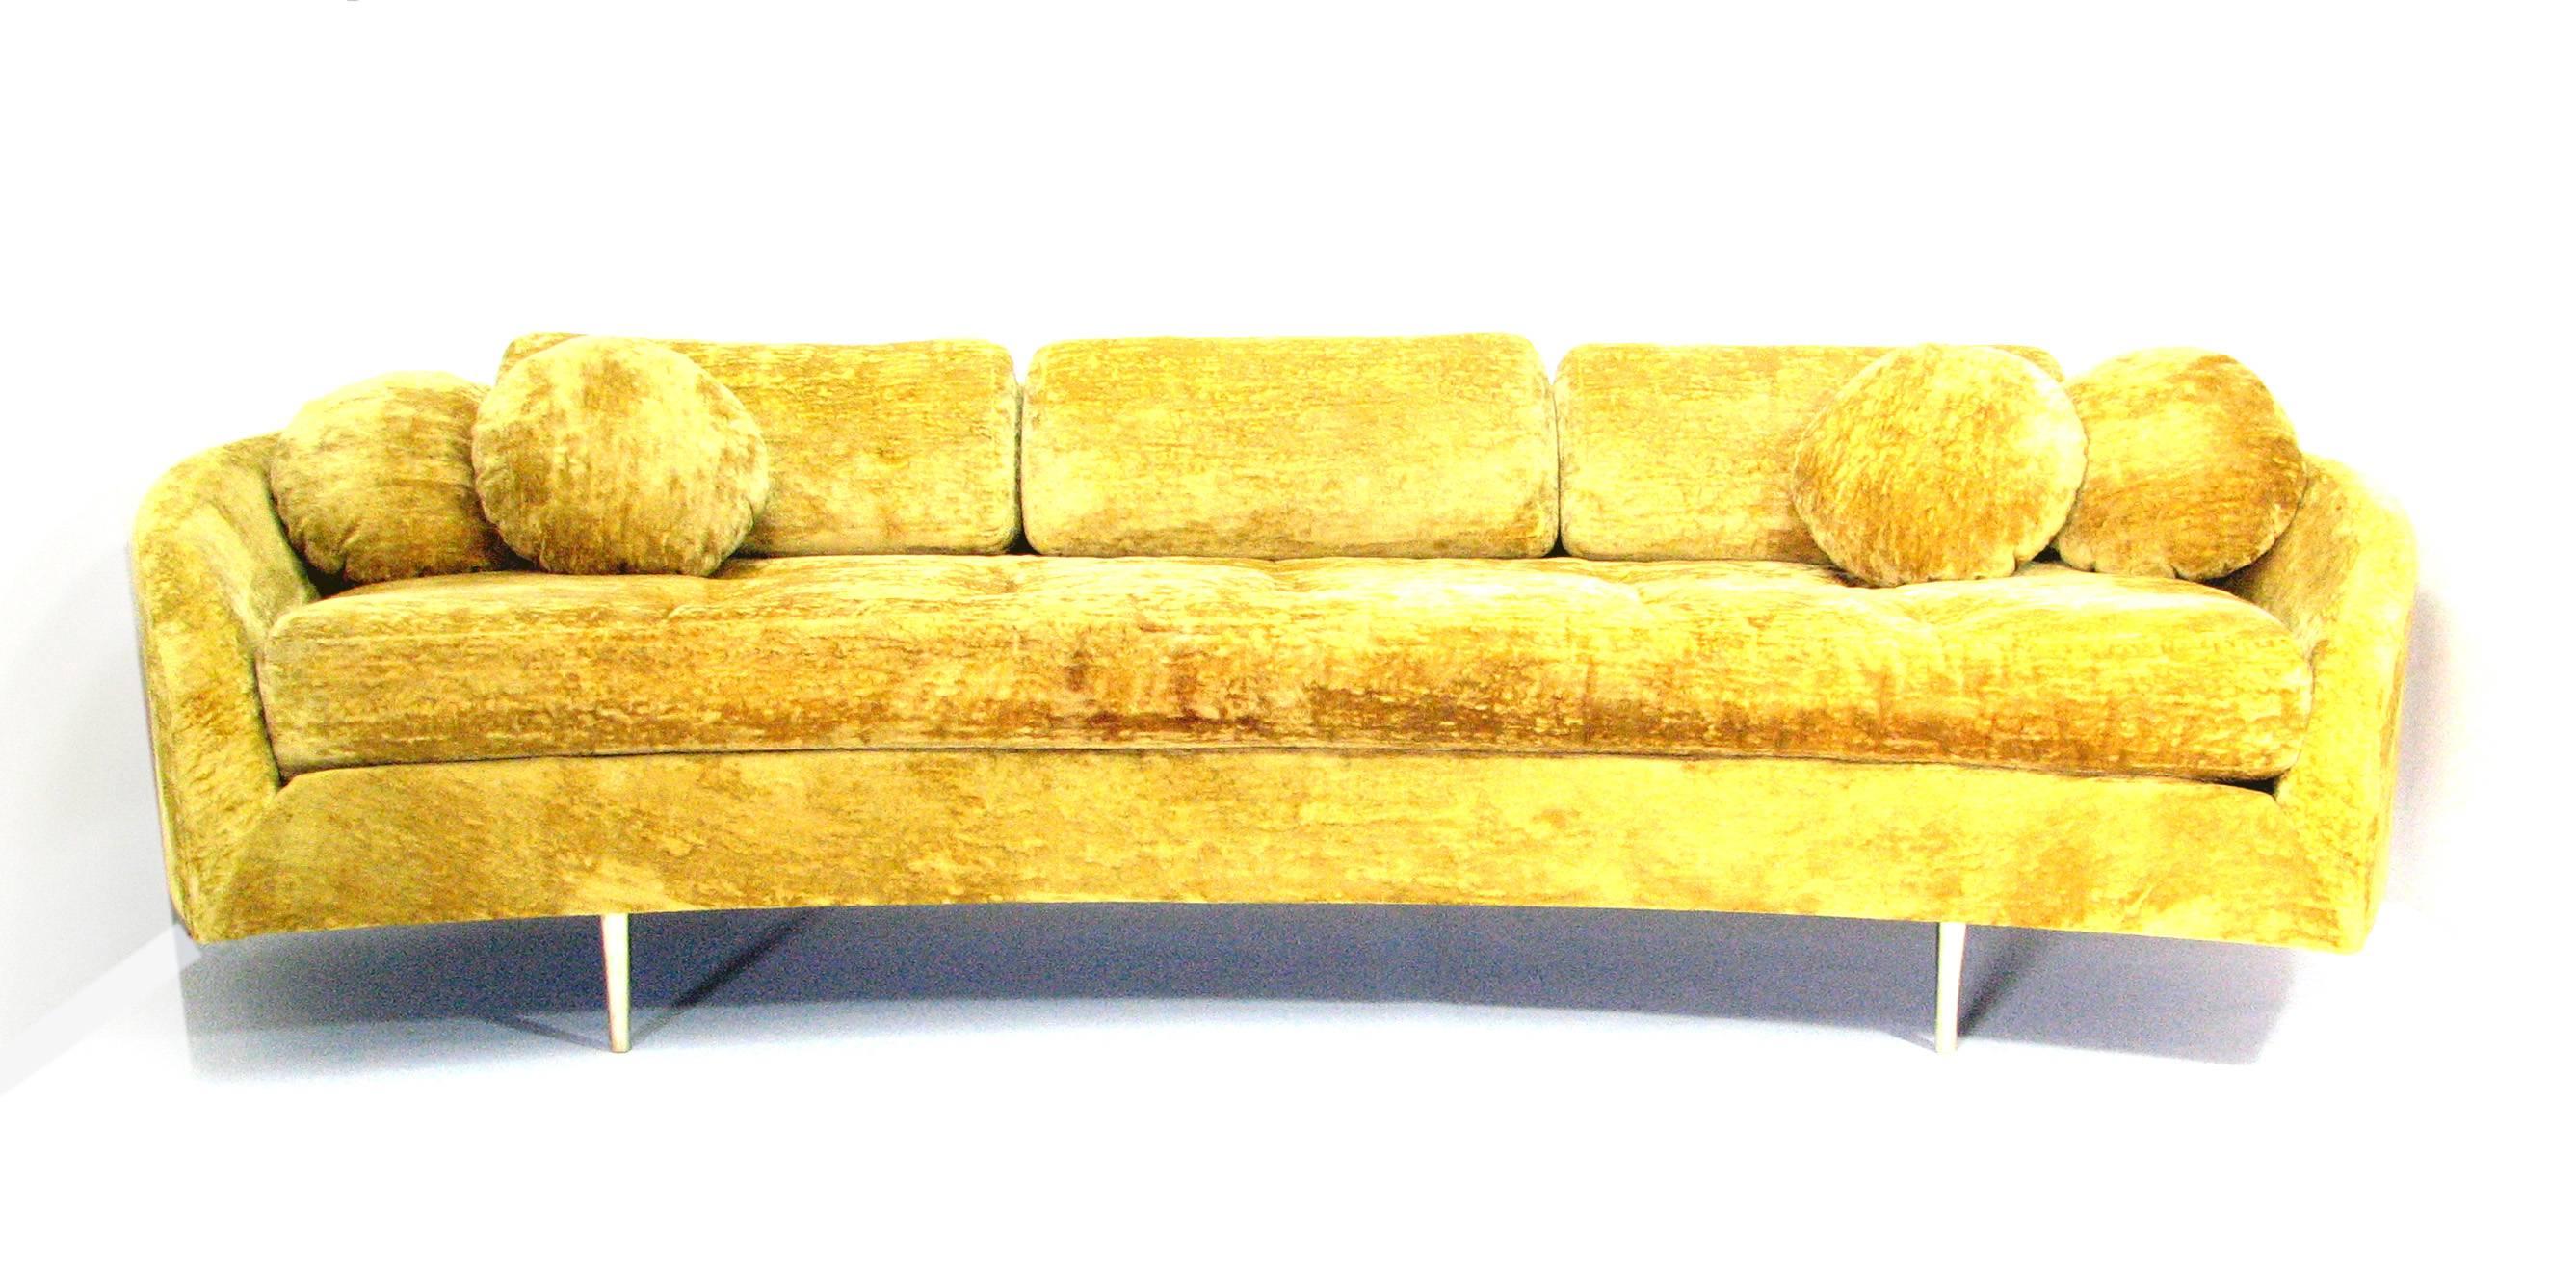 Dramatic floating Mid-Century sofa in original gold velvet upholstery on minimal gold metal legs.

Measures: 22.5 inches high at mid-arm.